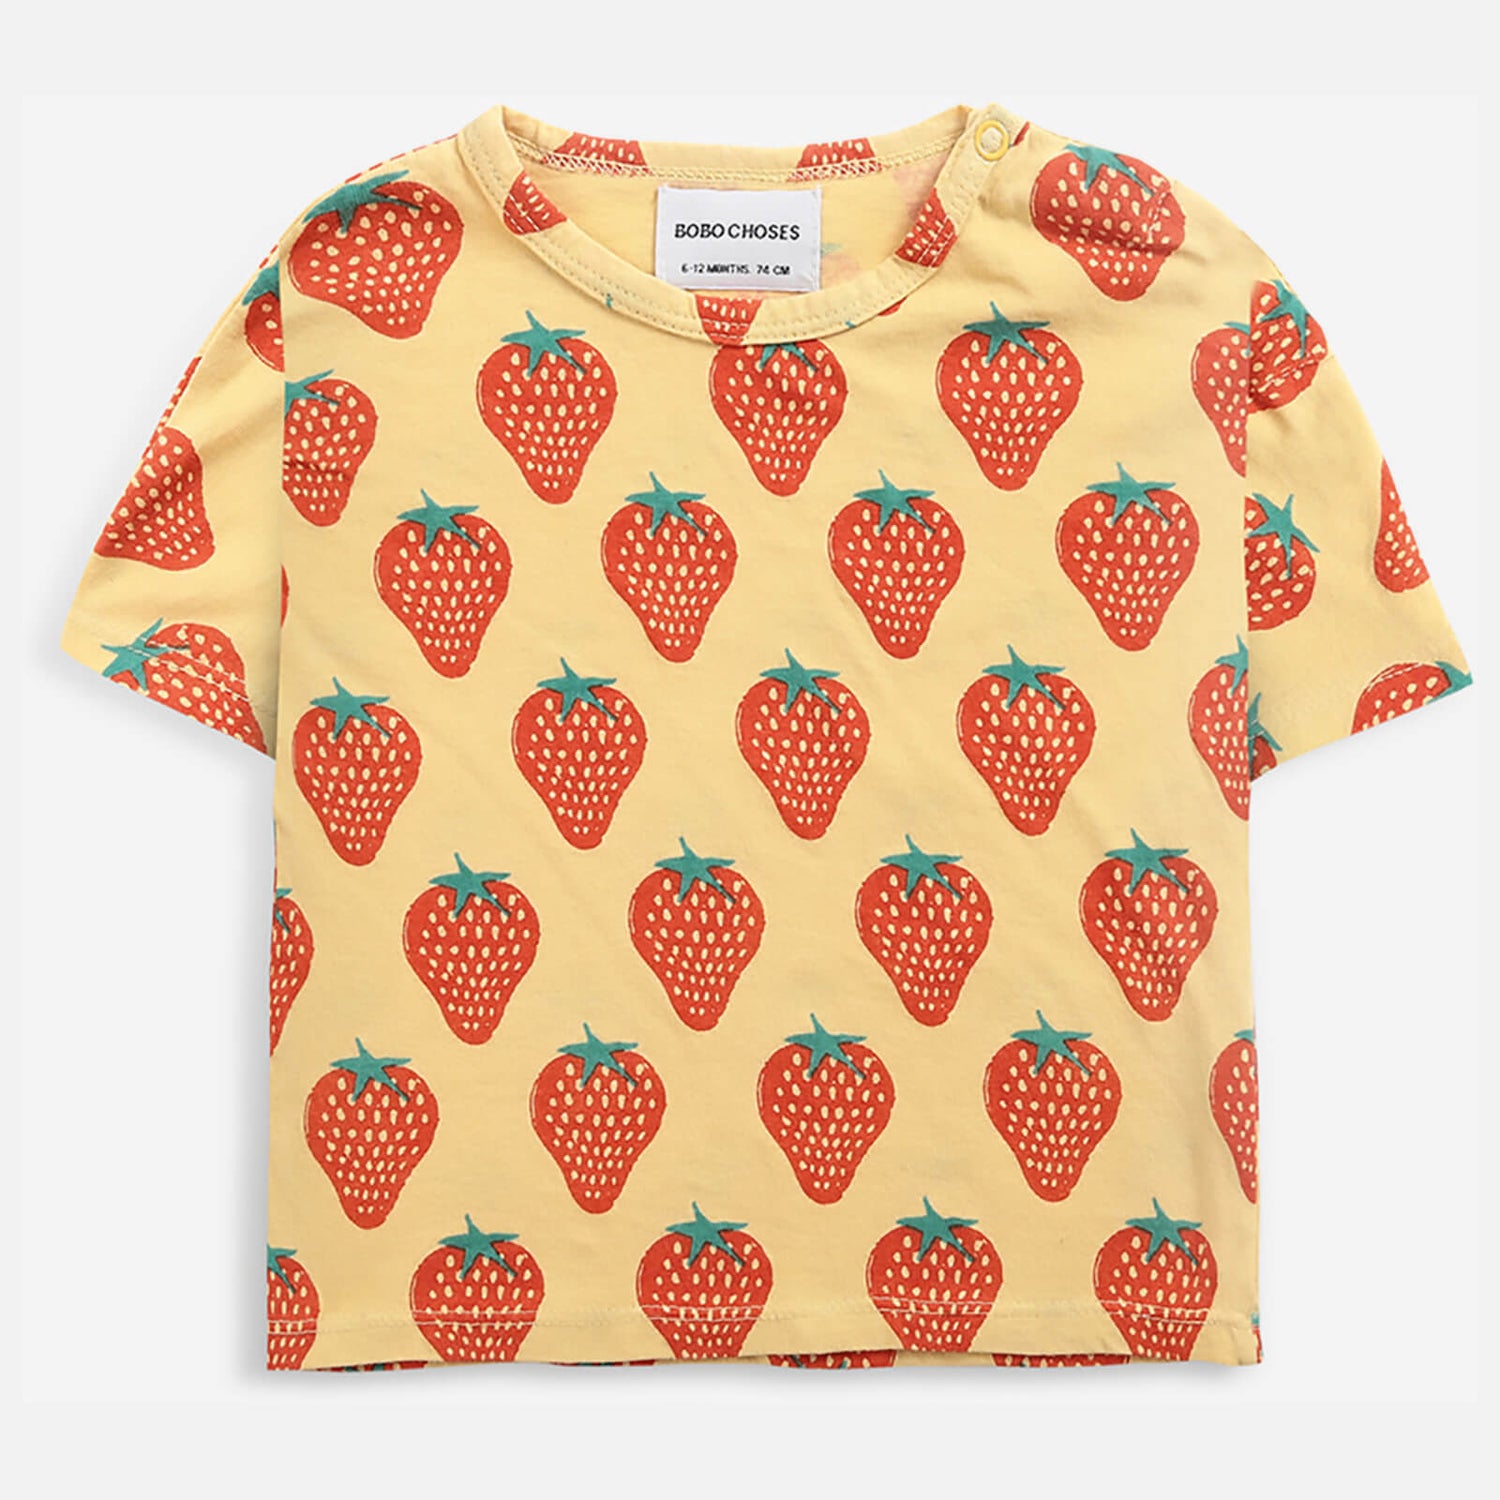 Bobo Choses Baby Strawberry All Over Short Sleeve Tshirt - 3-6 months